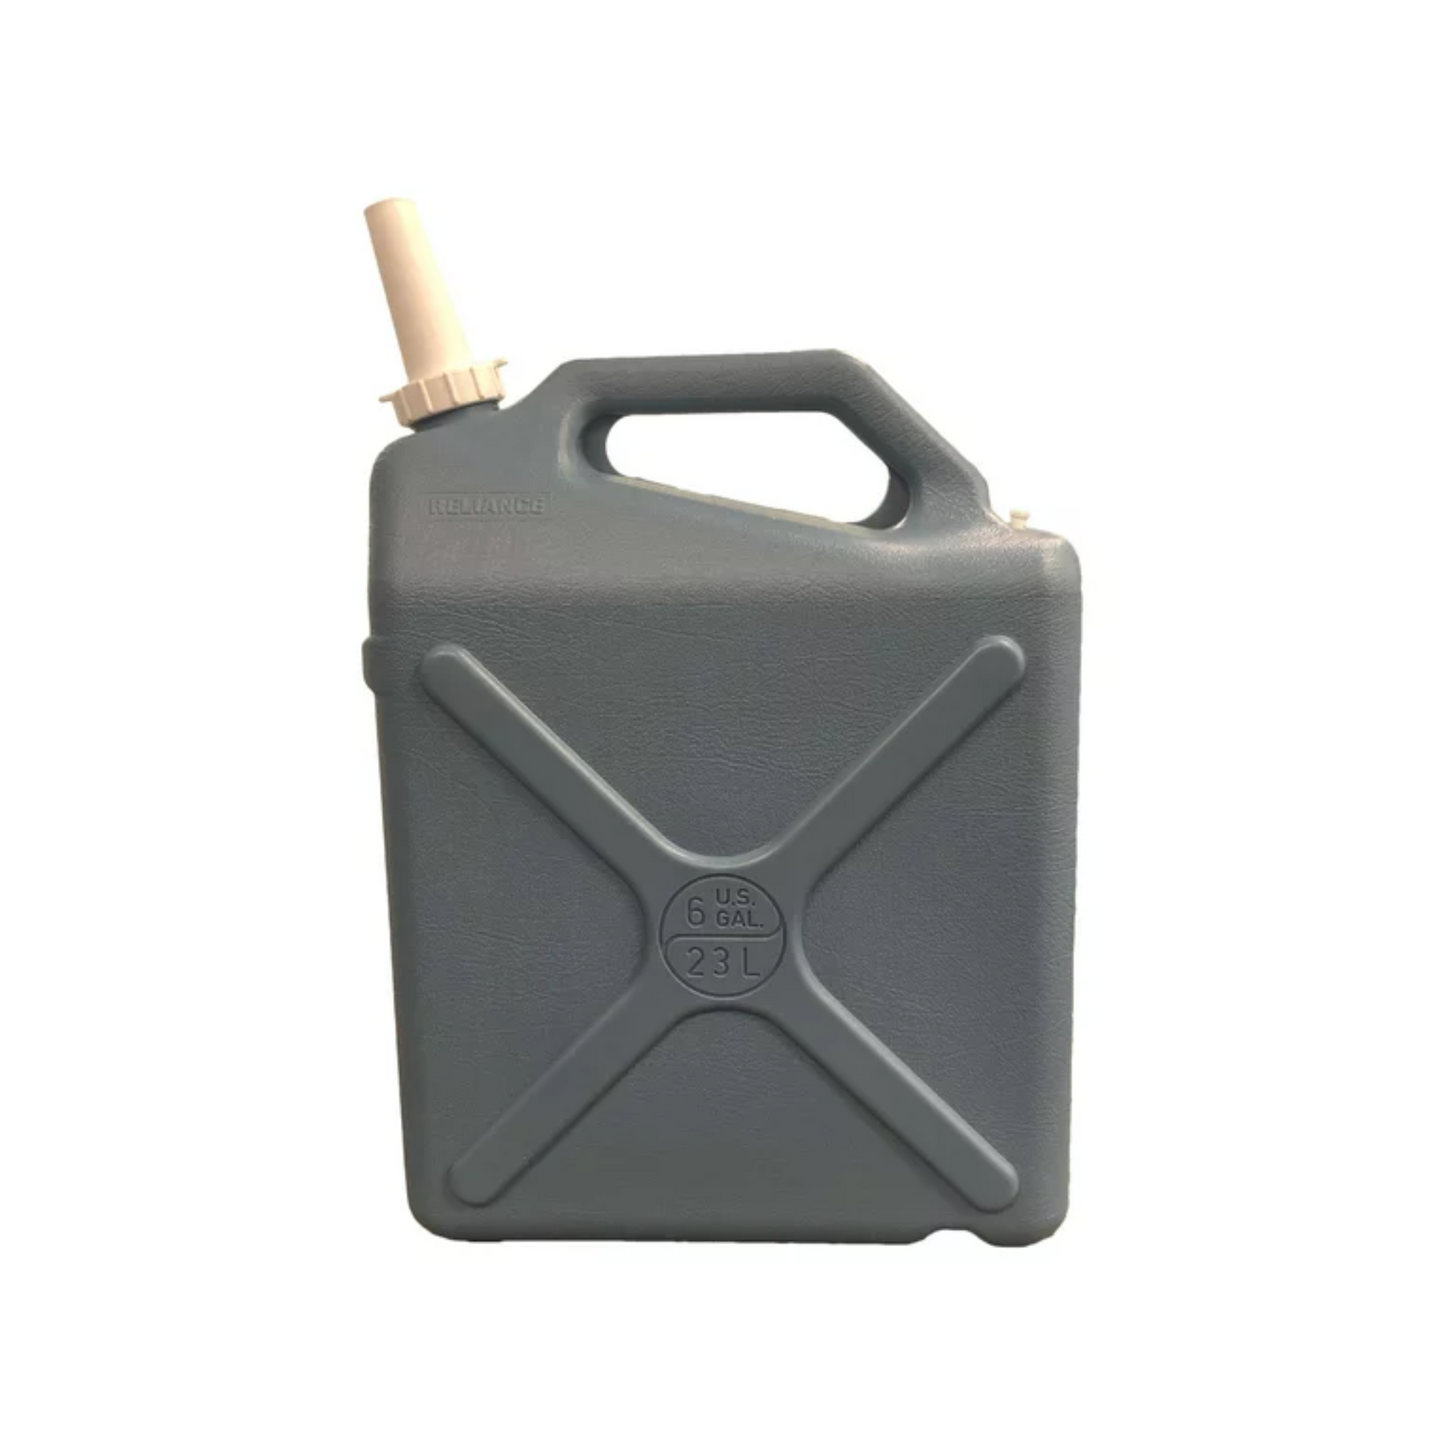 BPA-Free Water Storage Jerry Can - Ozark 6-Gal - Ideal for Emergency Preparedness and Long-Term Storage